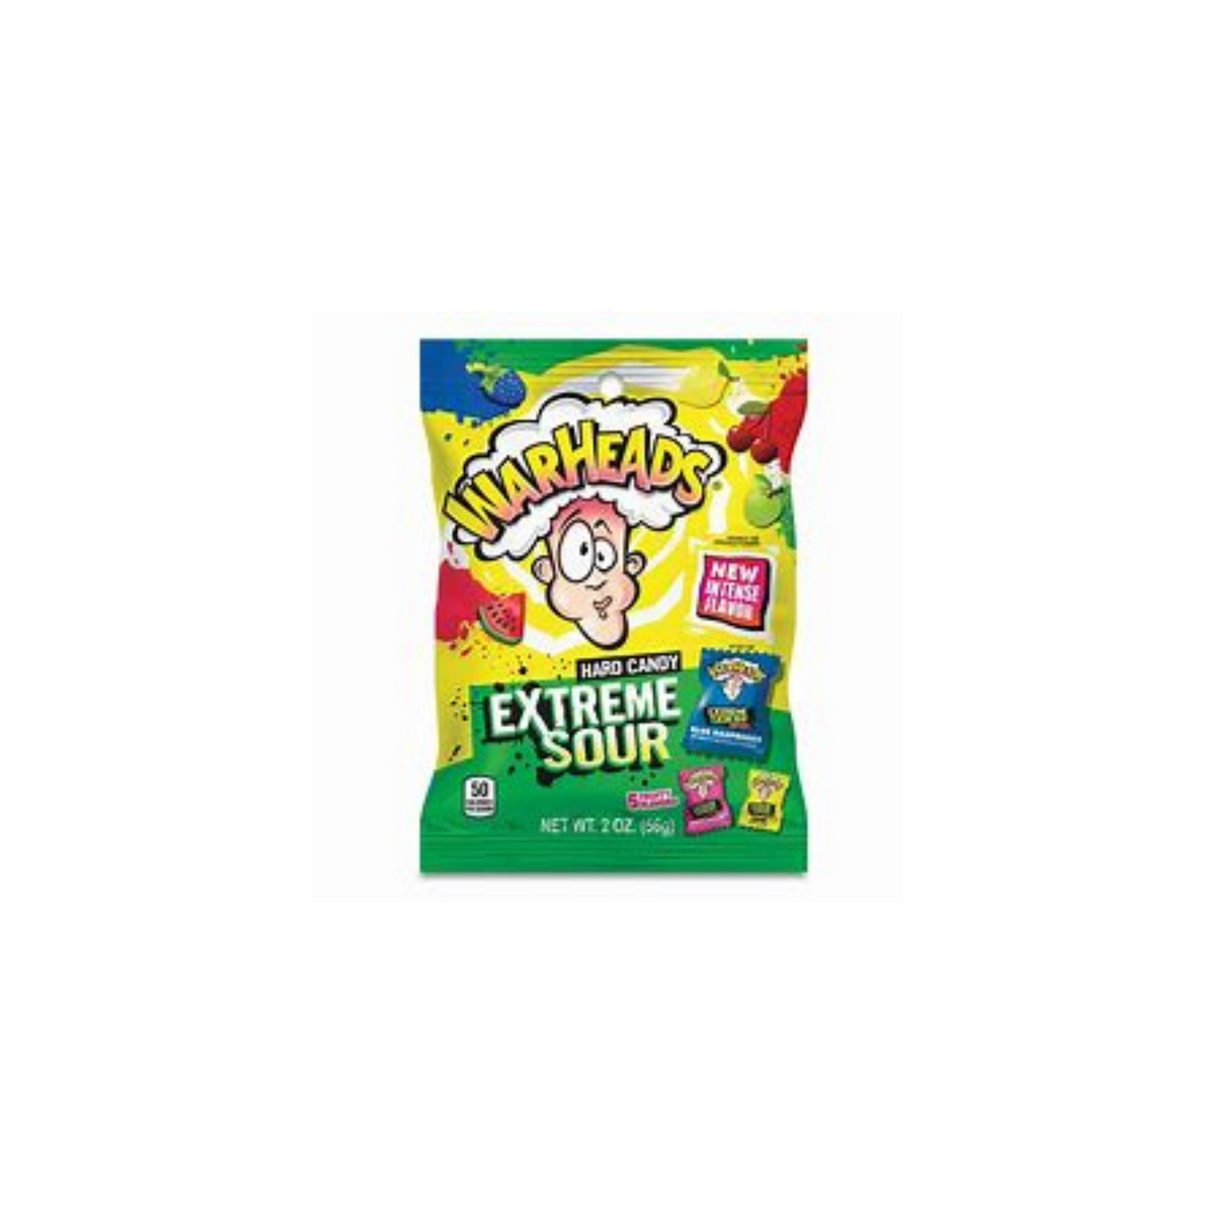 Warheads Extreme Sour Hard Candy - 56g